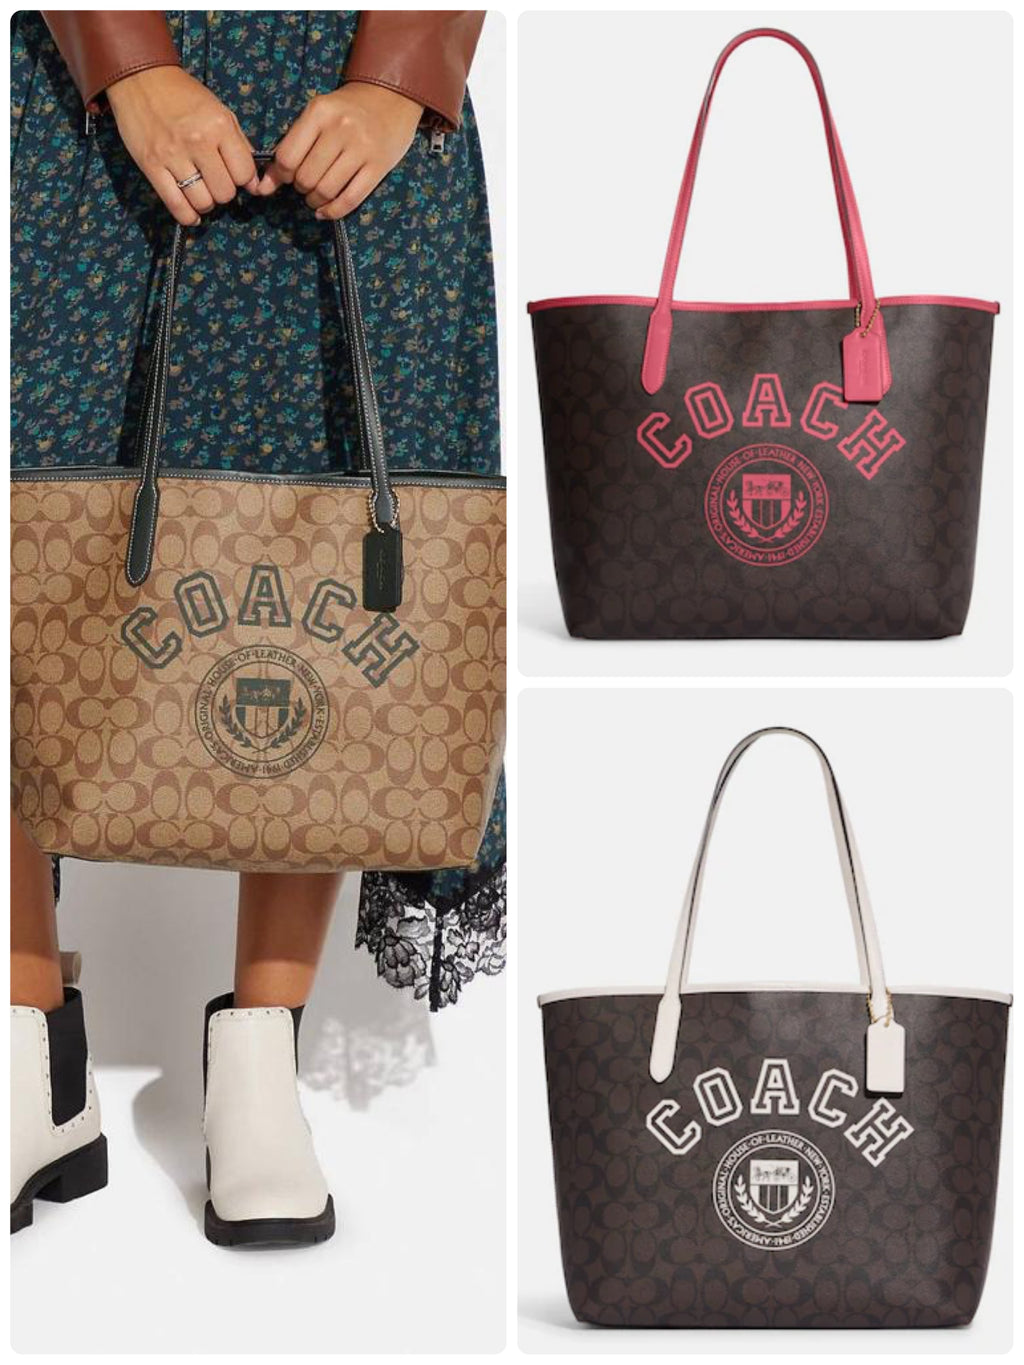 Coach Outlet City Tote In Signature Canvas With Varsity Motif